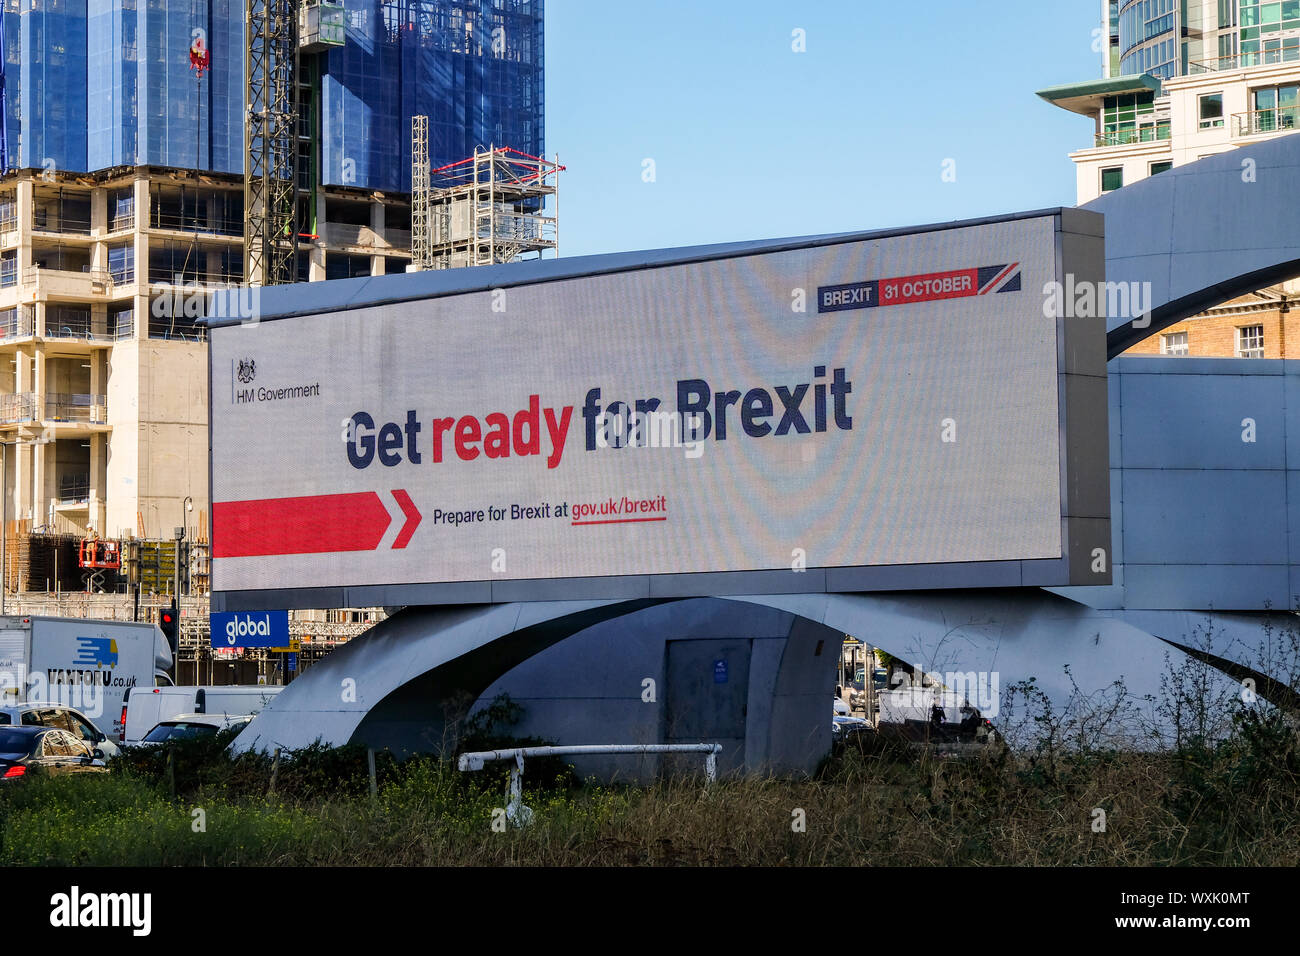 Vauxhall, London, UK. 17th September 2019. An electronic billboard in Vauxhall, London for Get Ready for Brexit, the campaign by the government to prepare for Brexit. Credit: Matthew Chattle/Alamy Live News Stock Photo